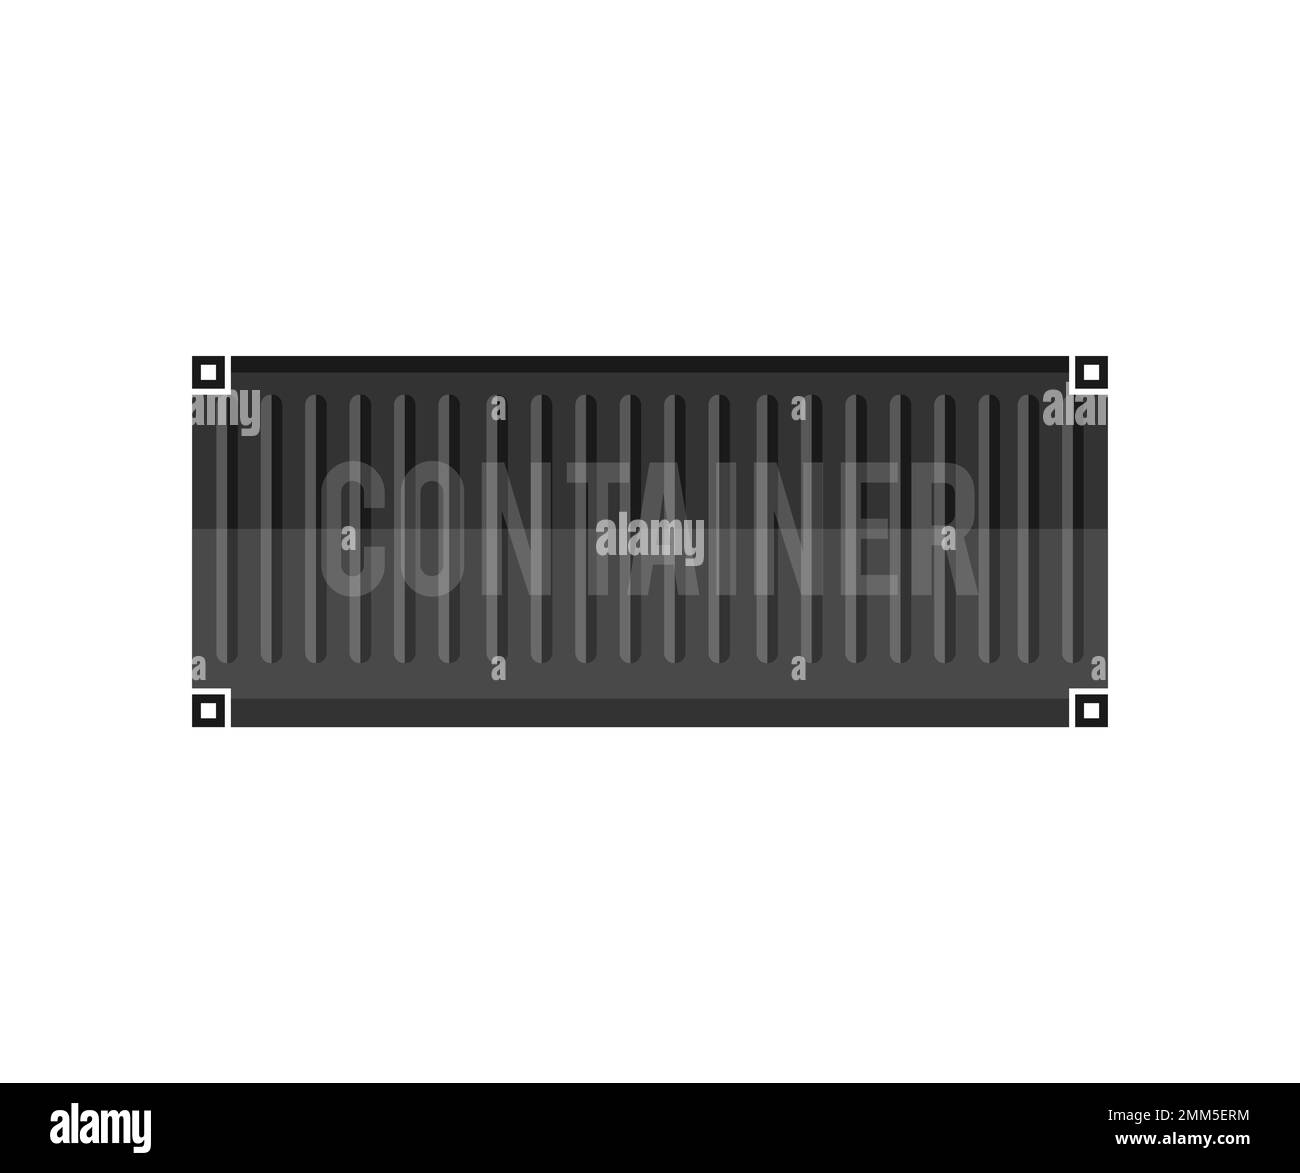 Shipping container, front view, harbor freight logo design. Closed shipping container. Shipping cargo containers. Large intermodal steel freight box. Stock Vector